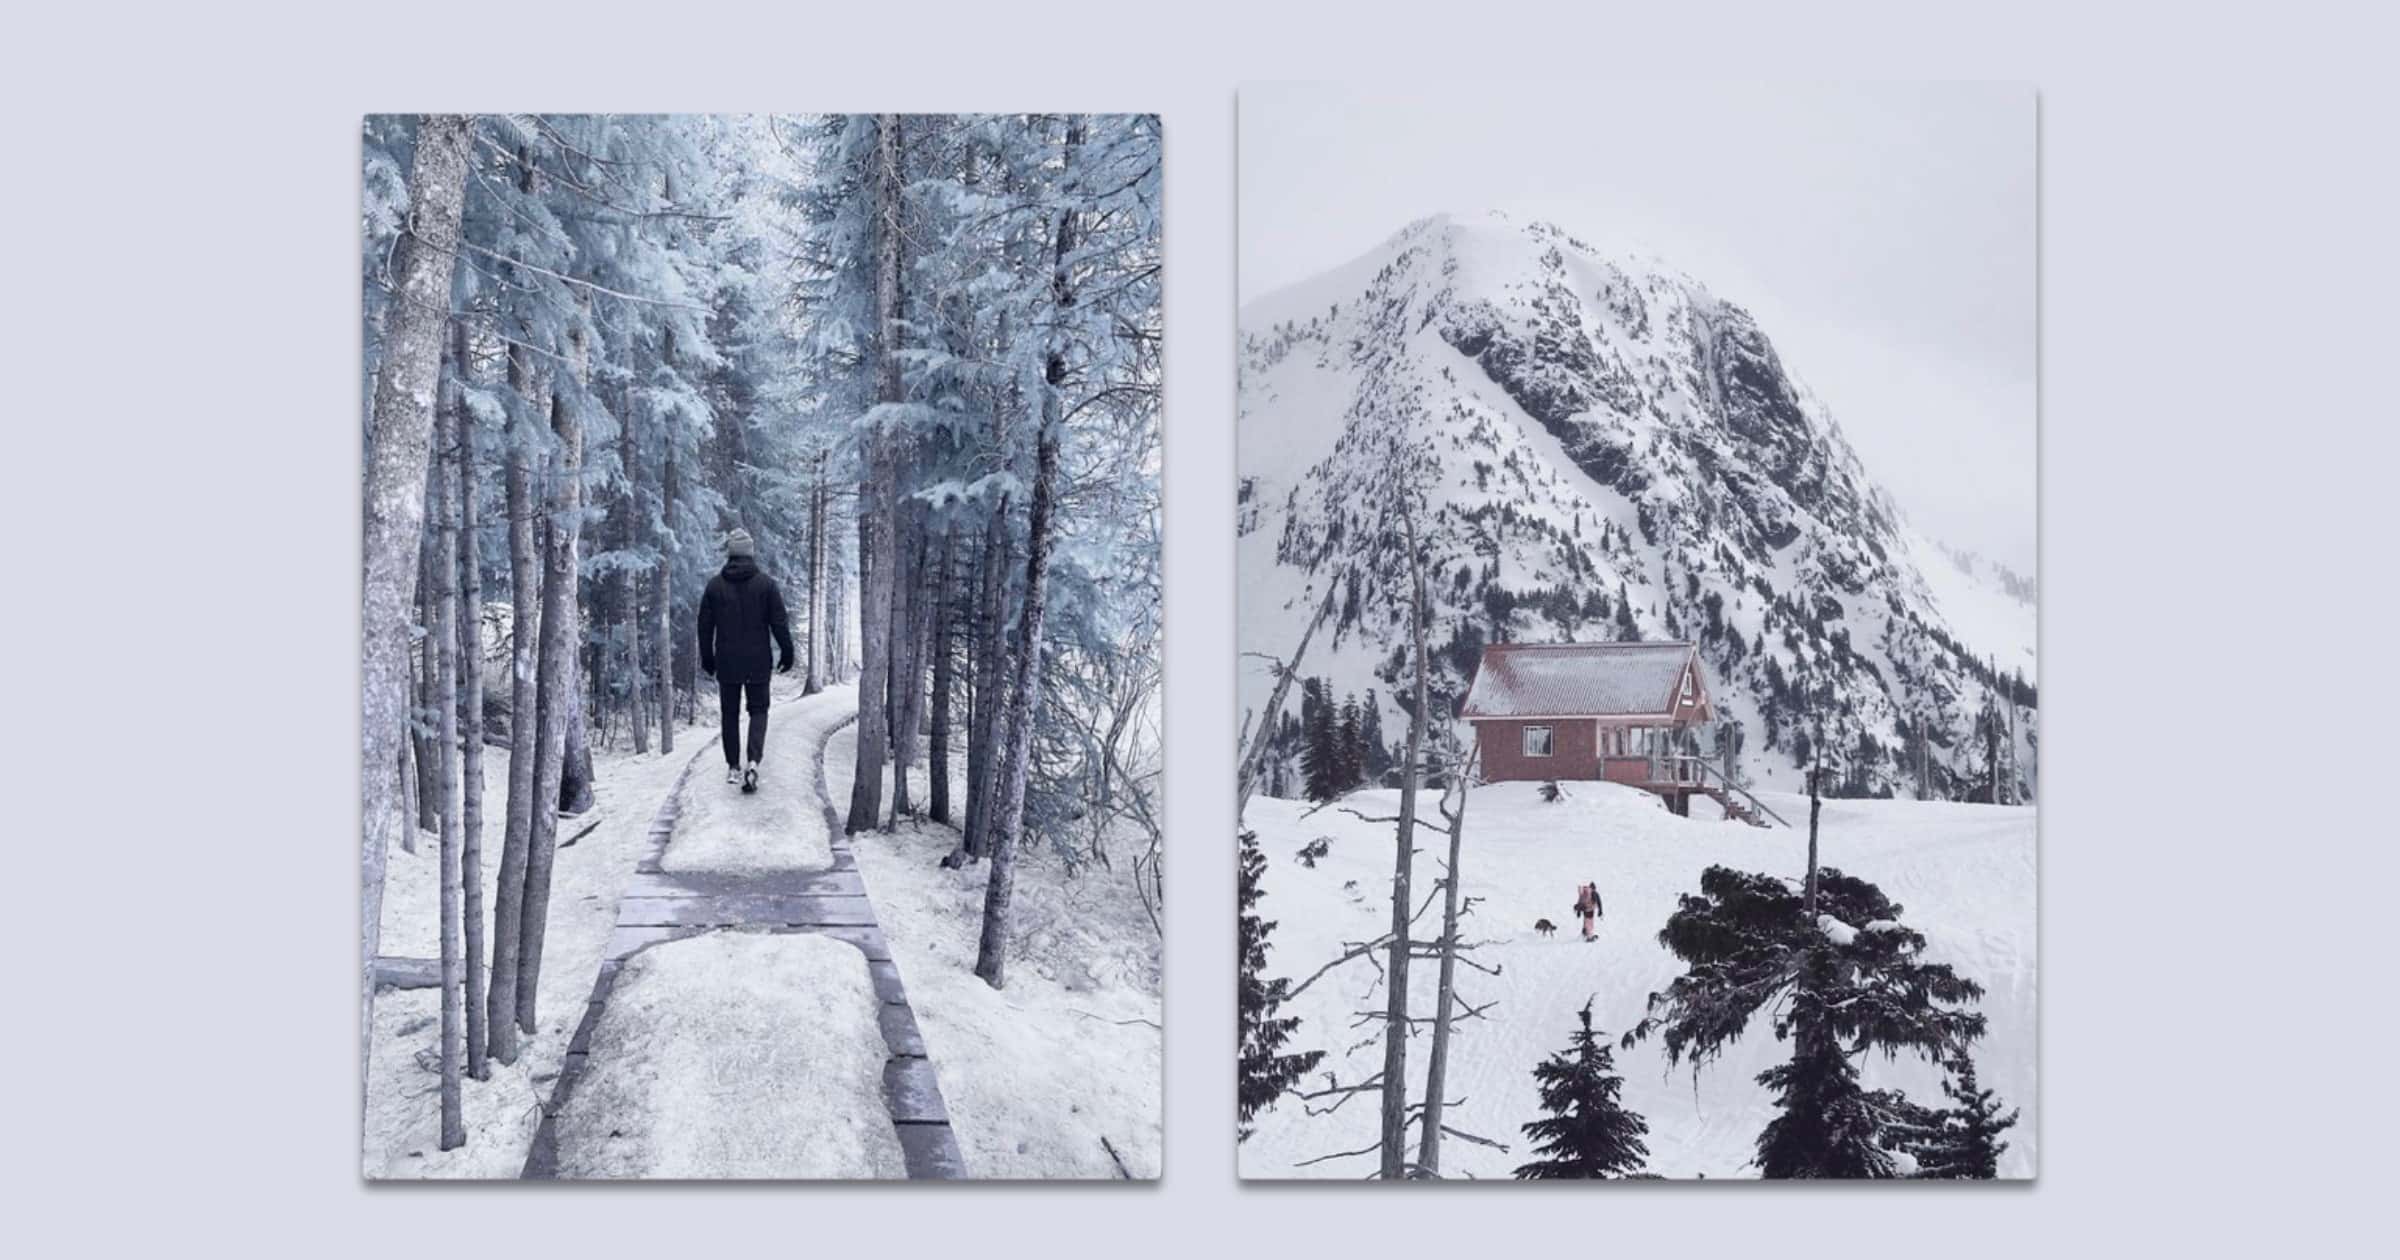 VSCO Introduces New Infrared Photography Presets for Mobile Users